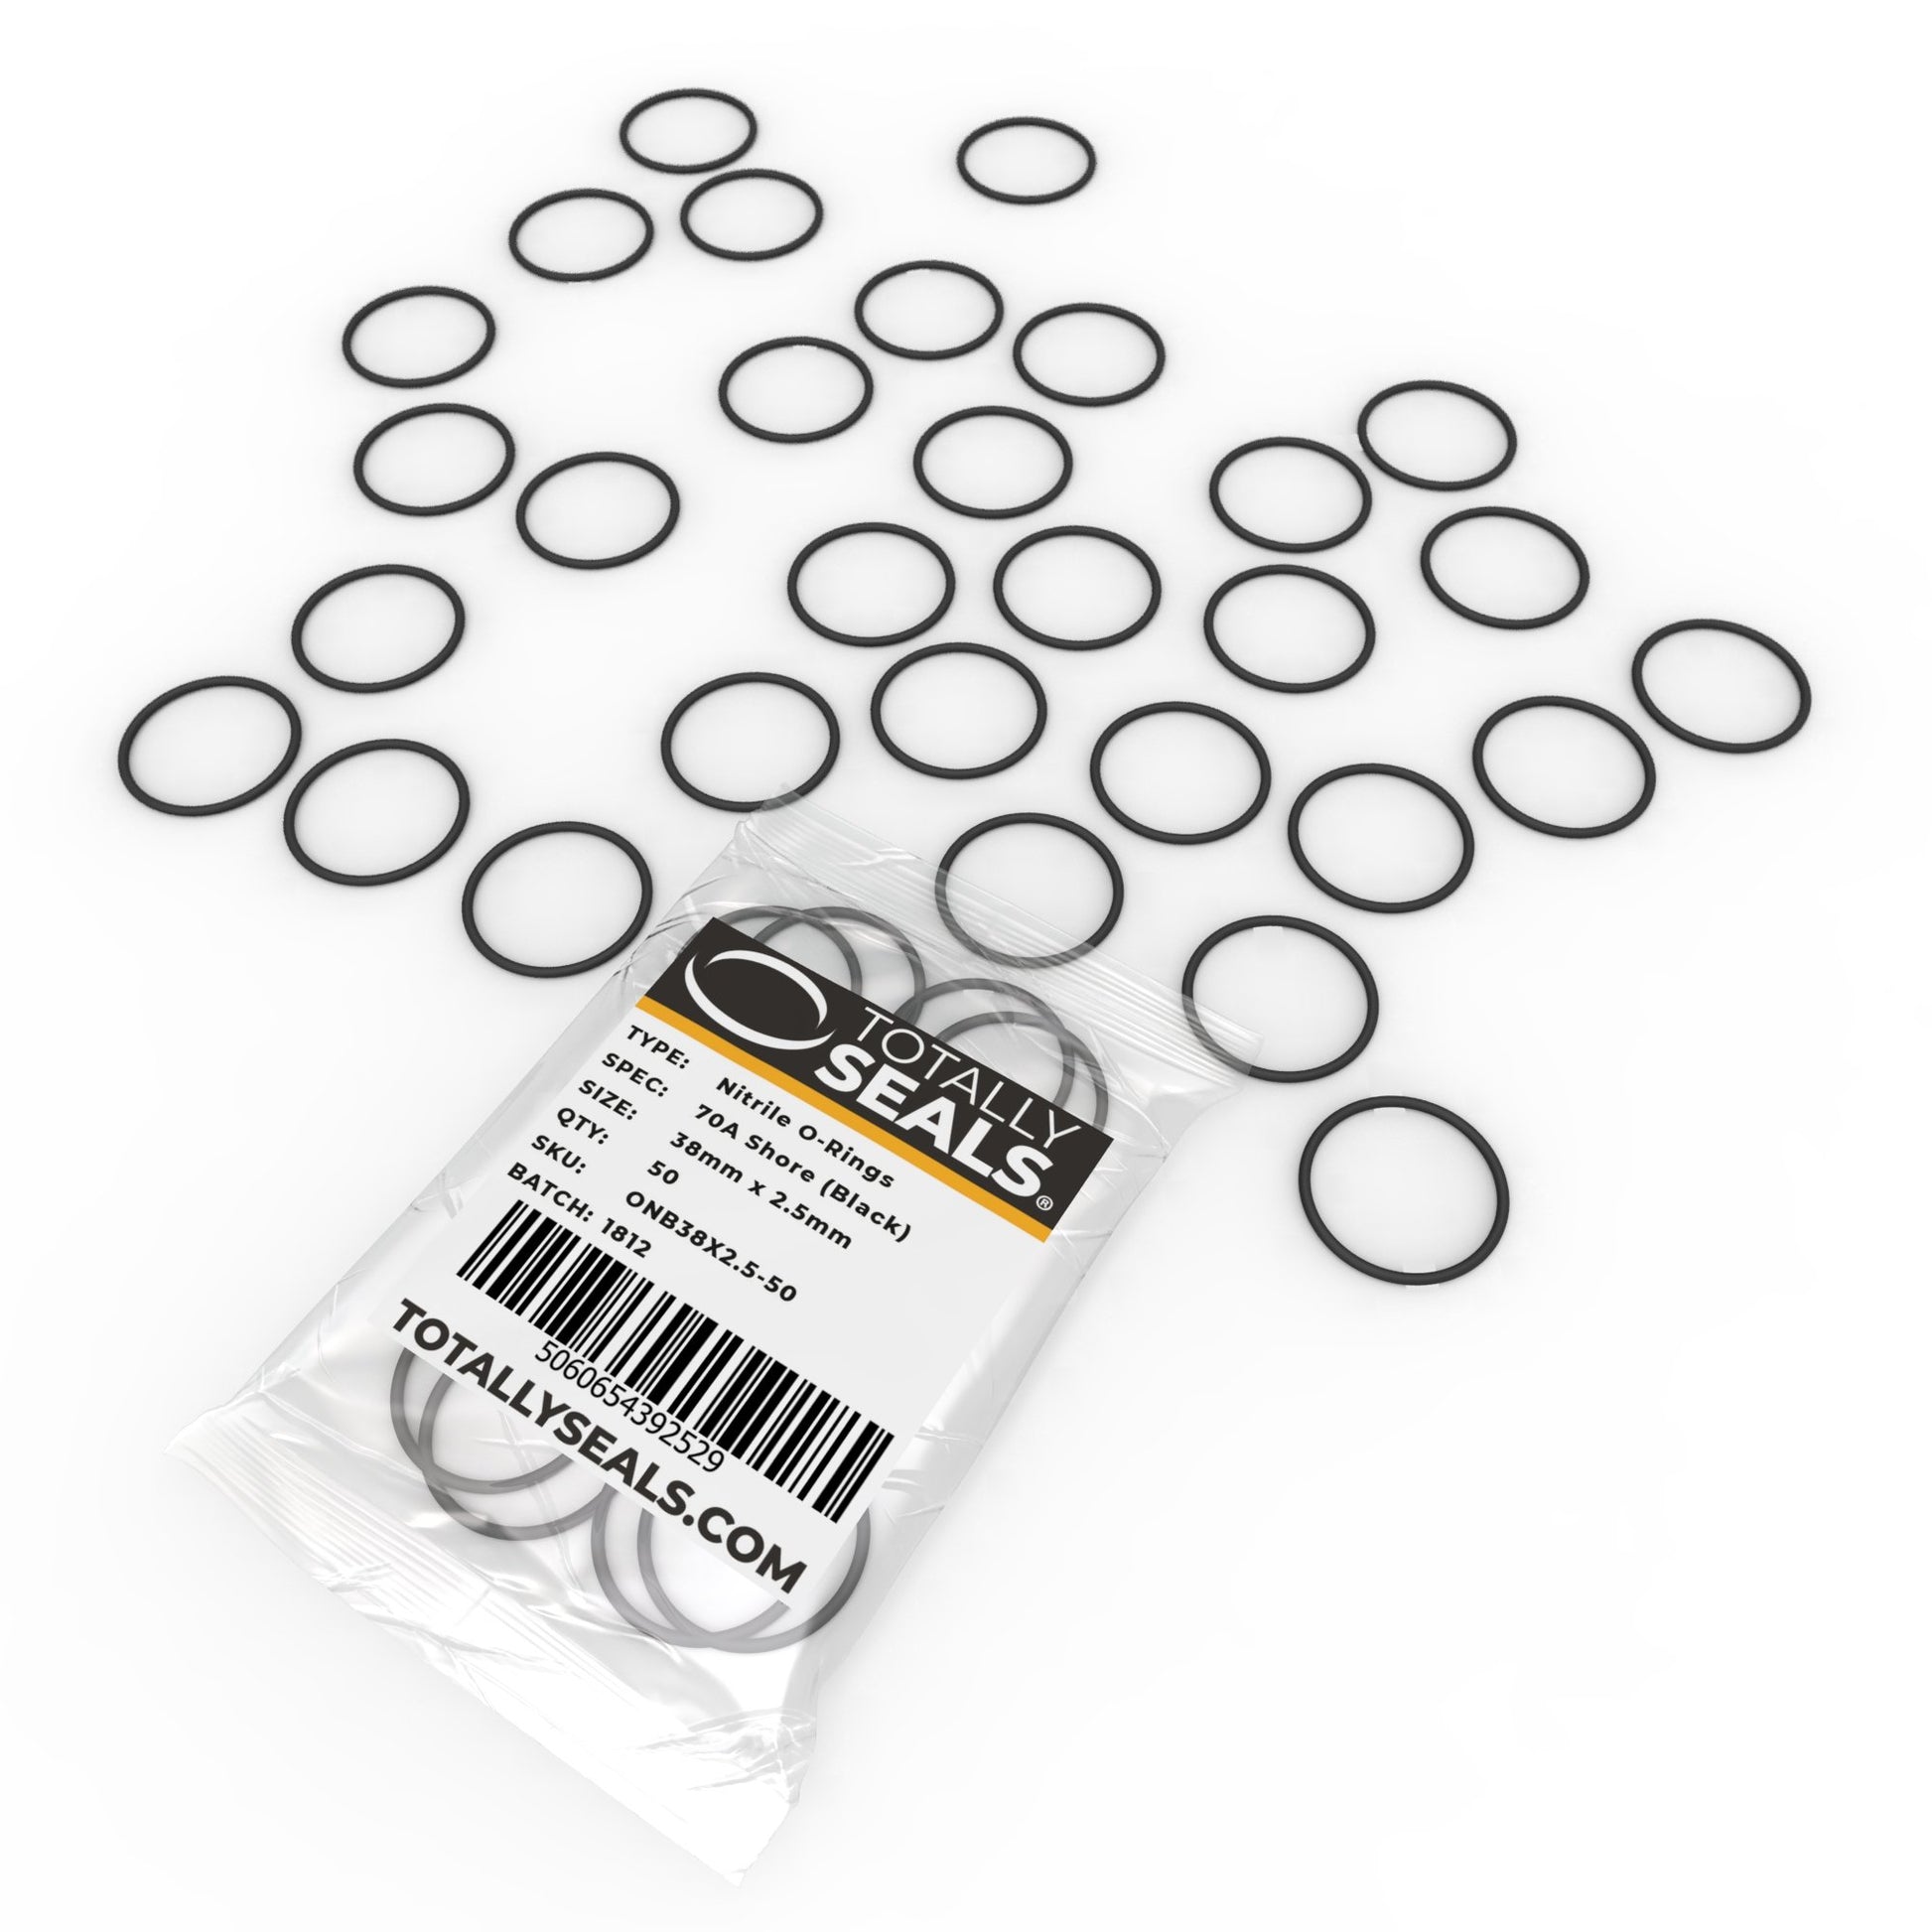 38mm x 2.5mm (43mm OD) Nitrile O-Rings - Totally Seals®